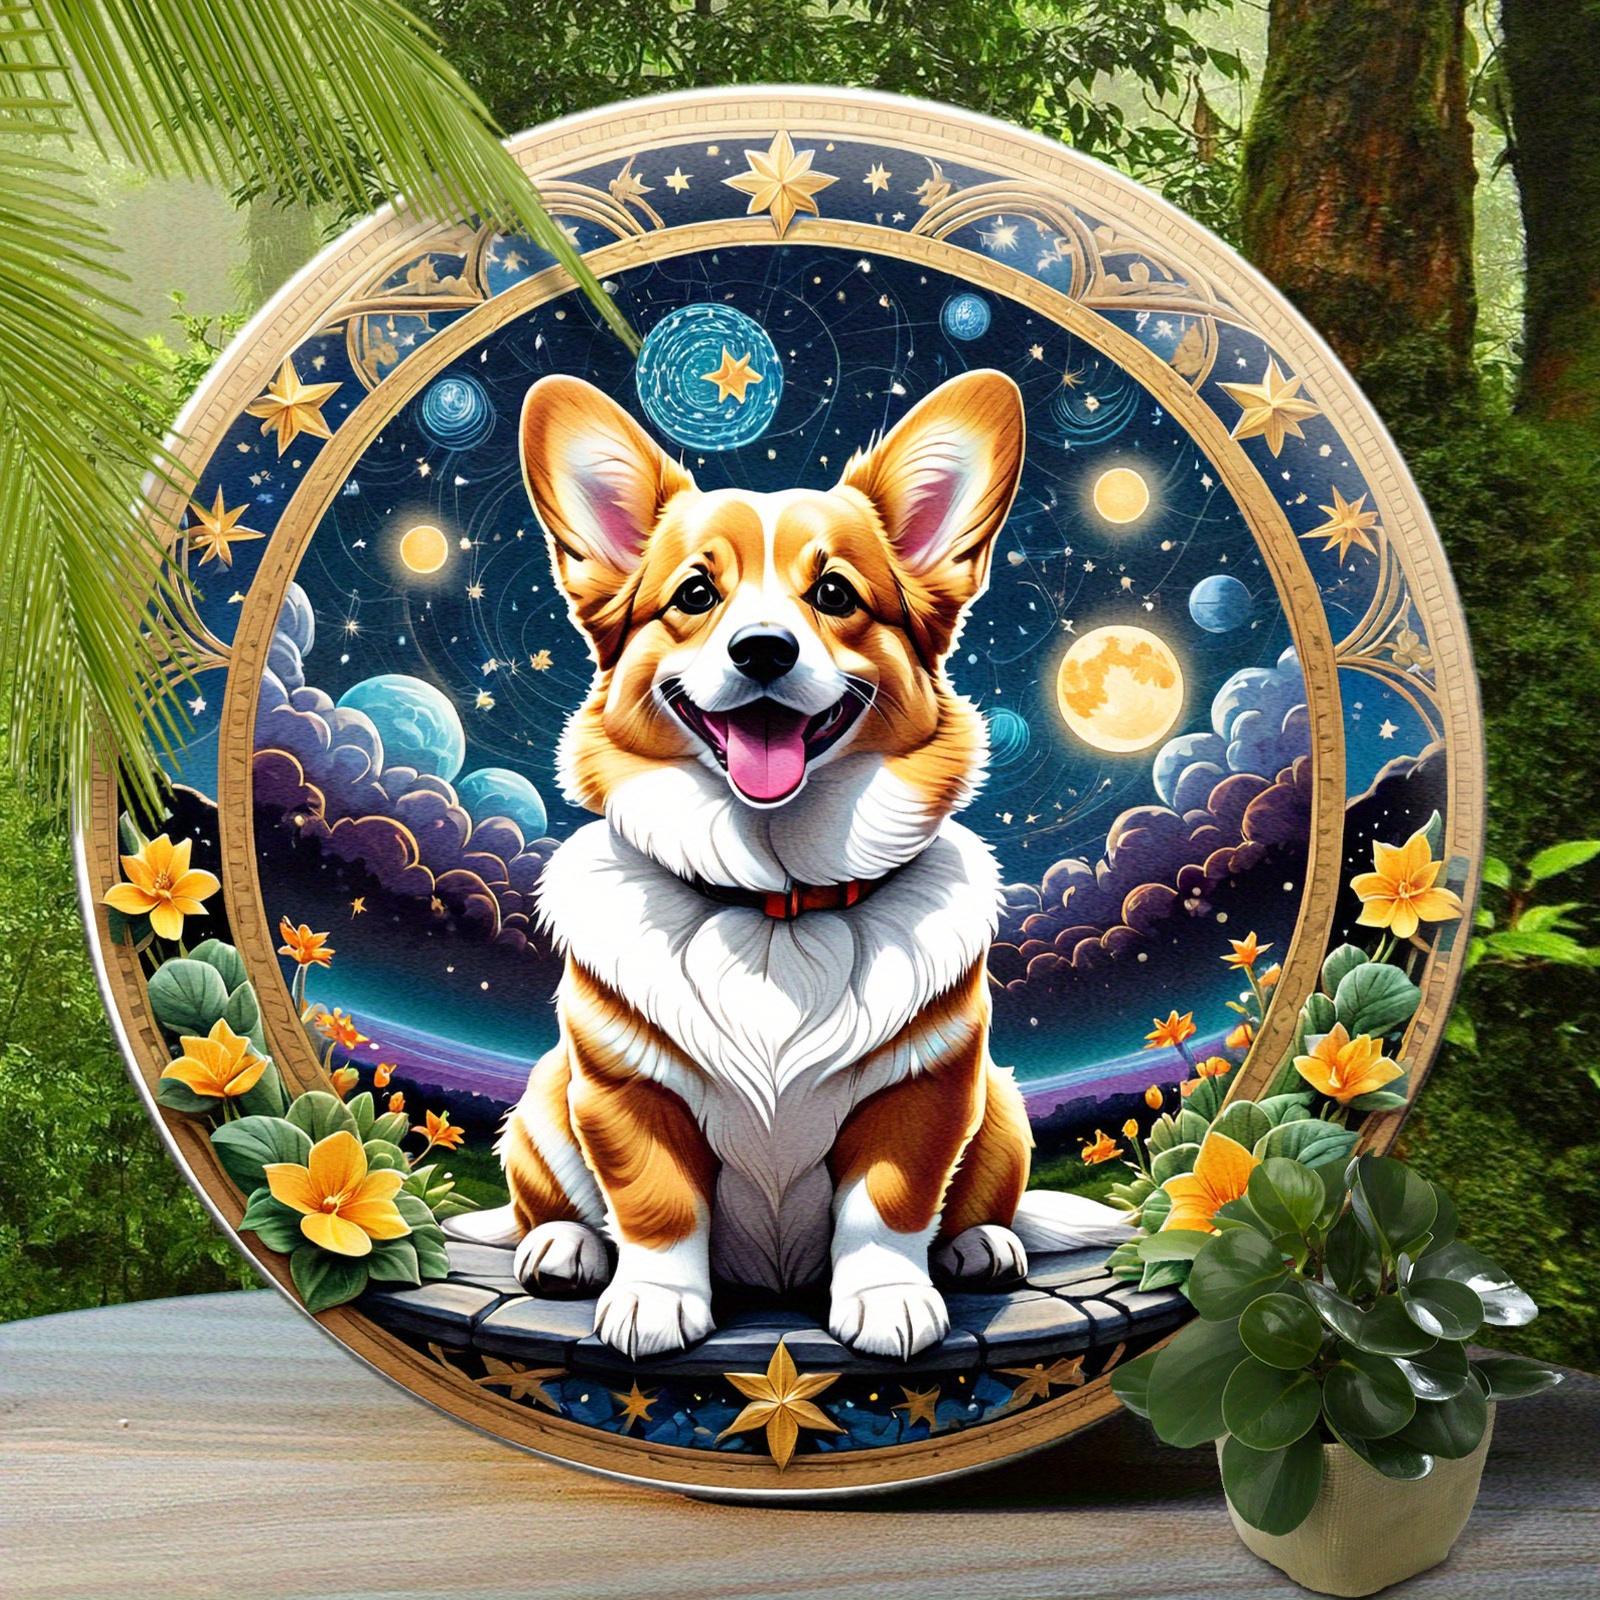 

1pc, Pembroke Welsh Corgi Sign - Cute Dog Aluminum Sign, Suitable For Home Room Cafe Bedroom Bar Living Room Wall Decor, Round Fashion Art Aesthetic, Holiday Gift (8"x8"/20cm*20cm)